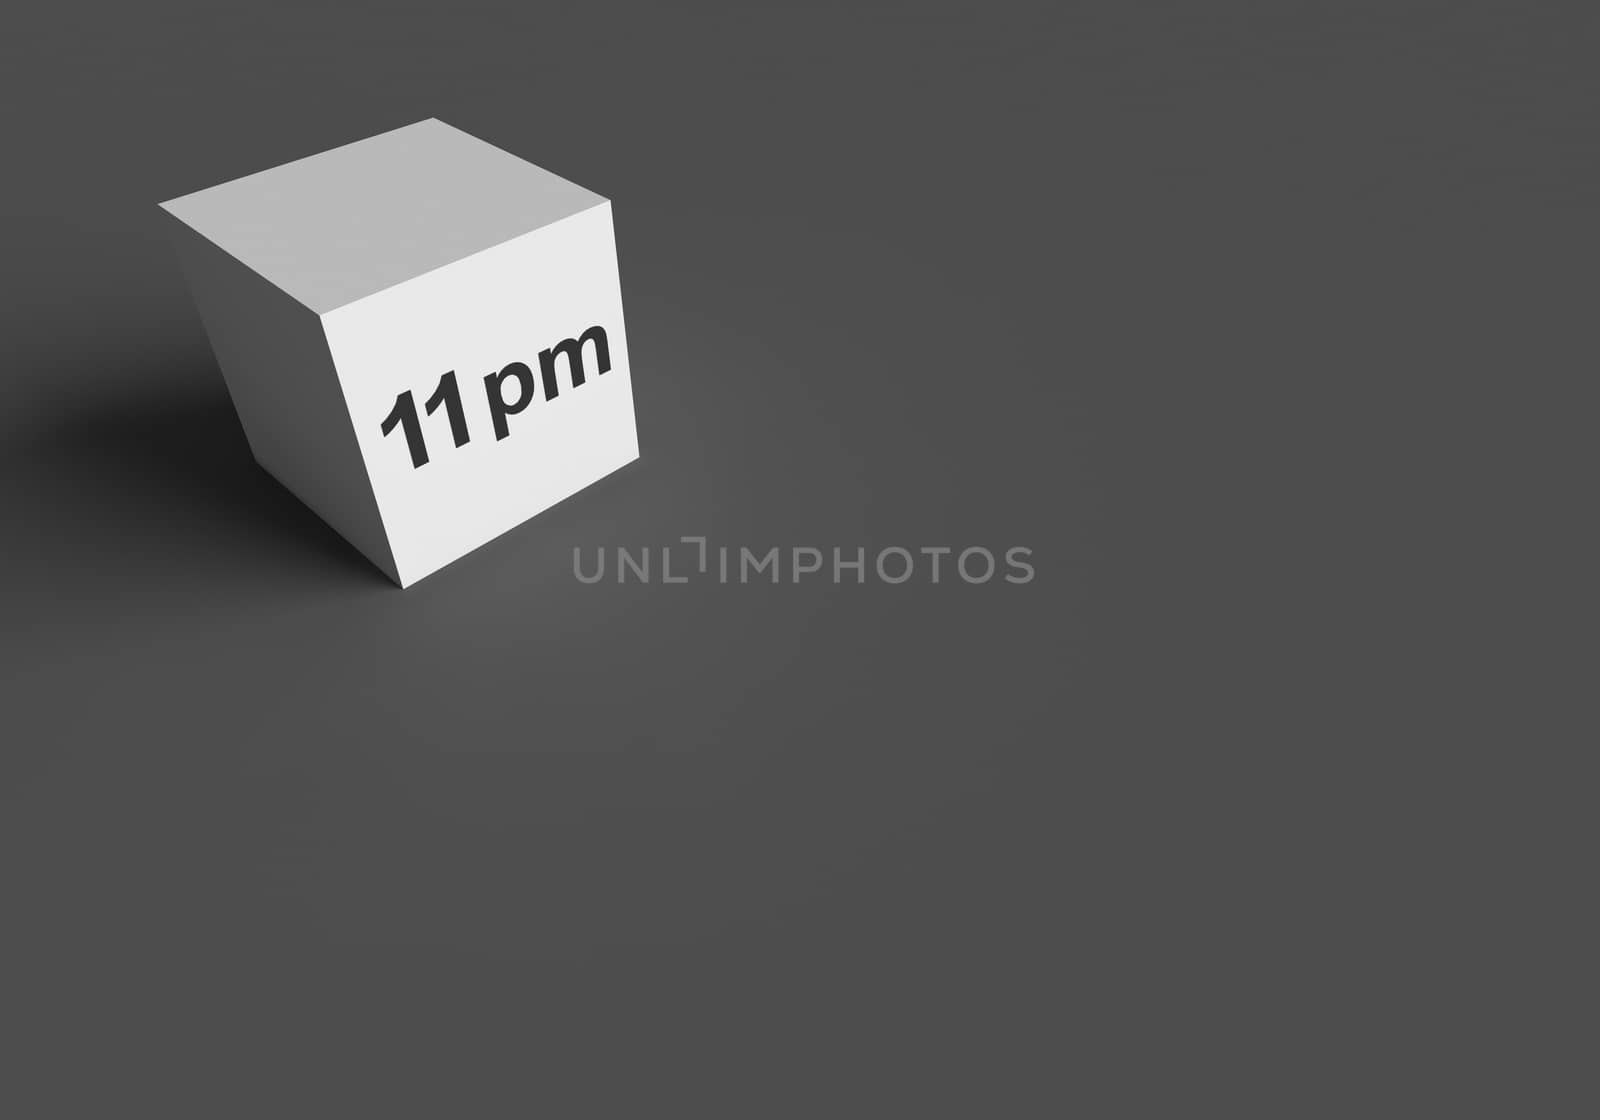 3D RENDERING WORDS 11 pm ON WHITE CUBE by PrettyTG